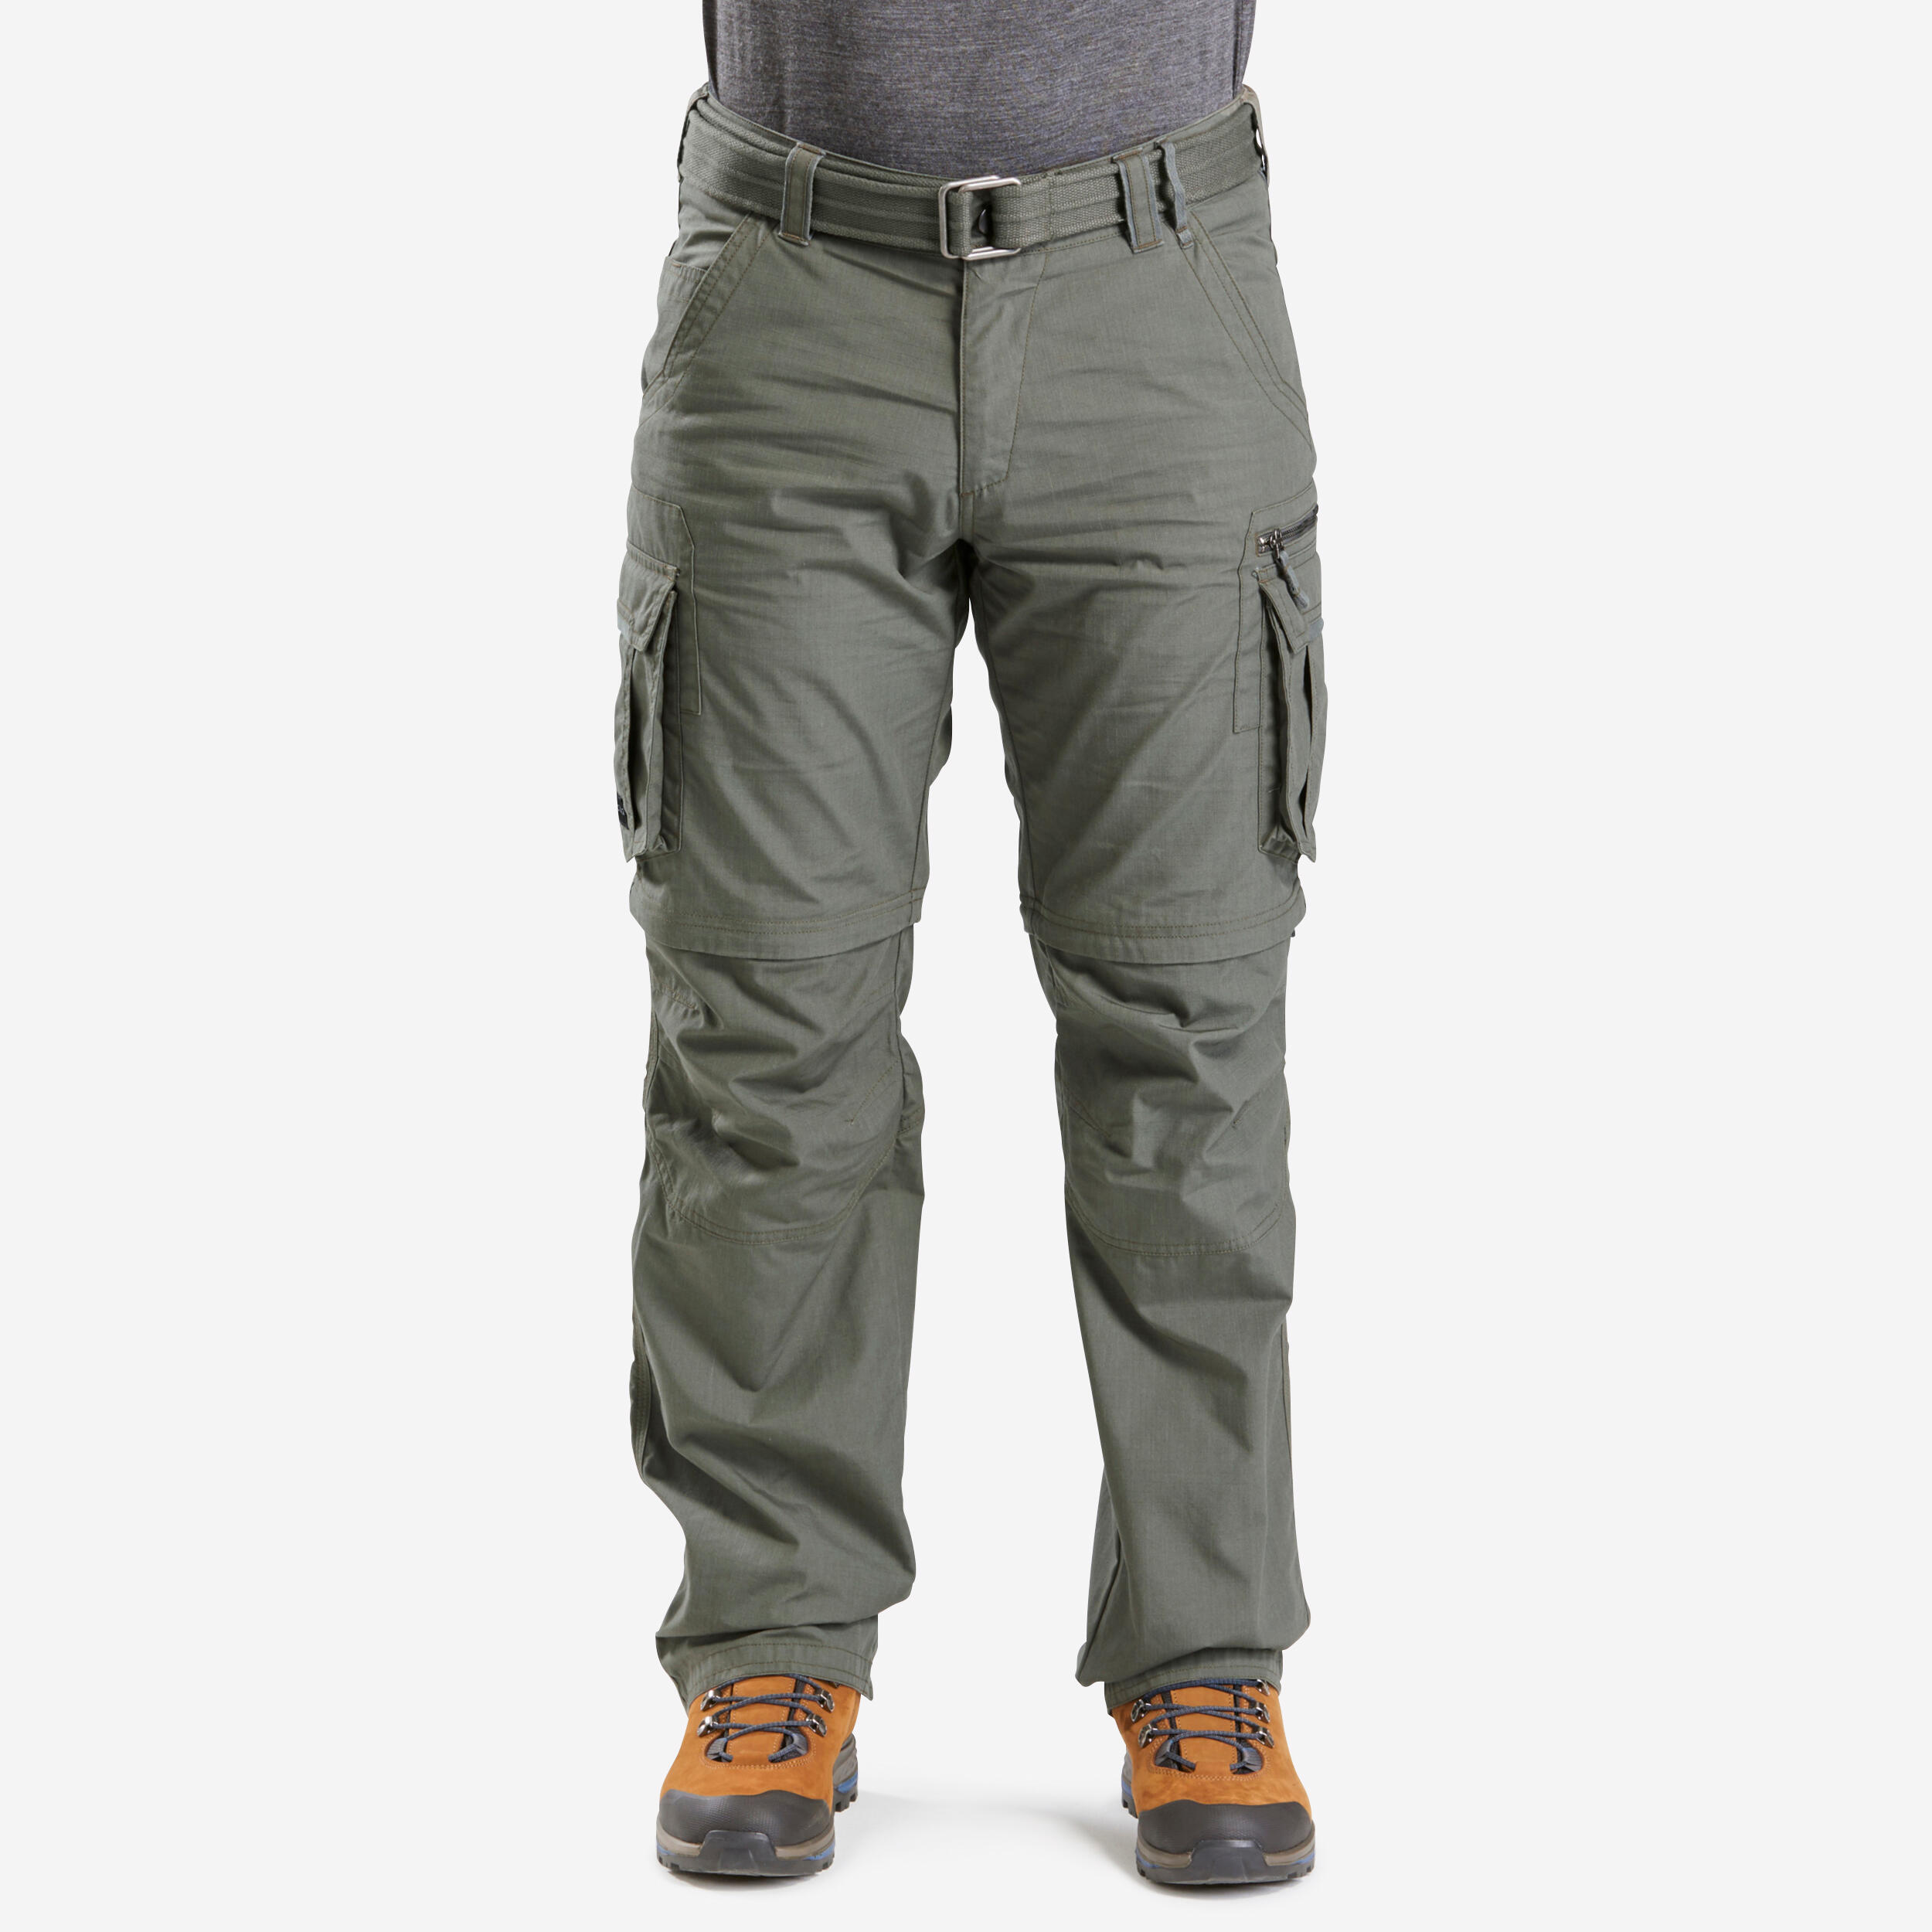 Relaxed Fit Zip-off cargo trousers - Light grey - Men | H&M IN